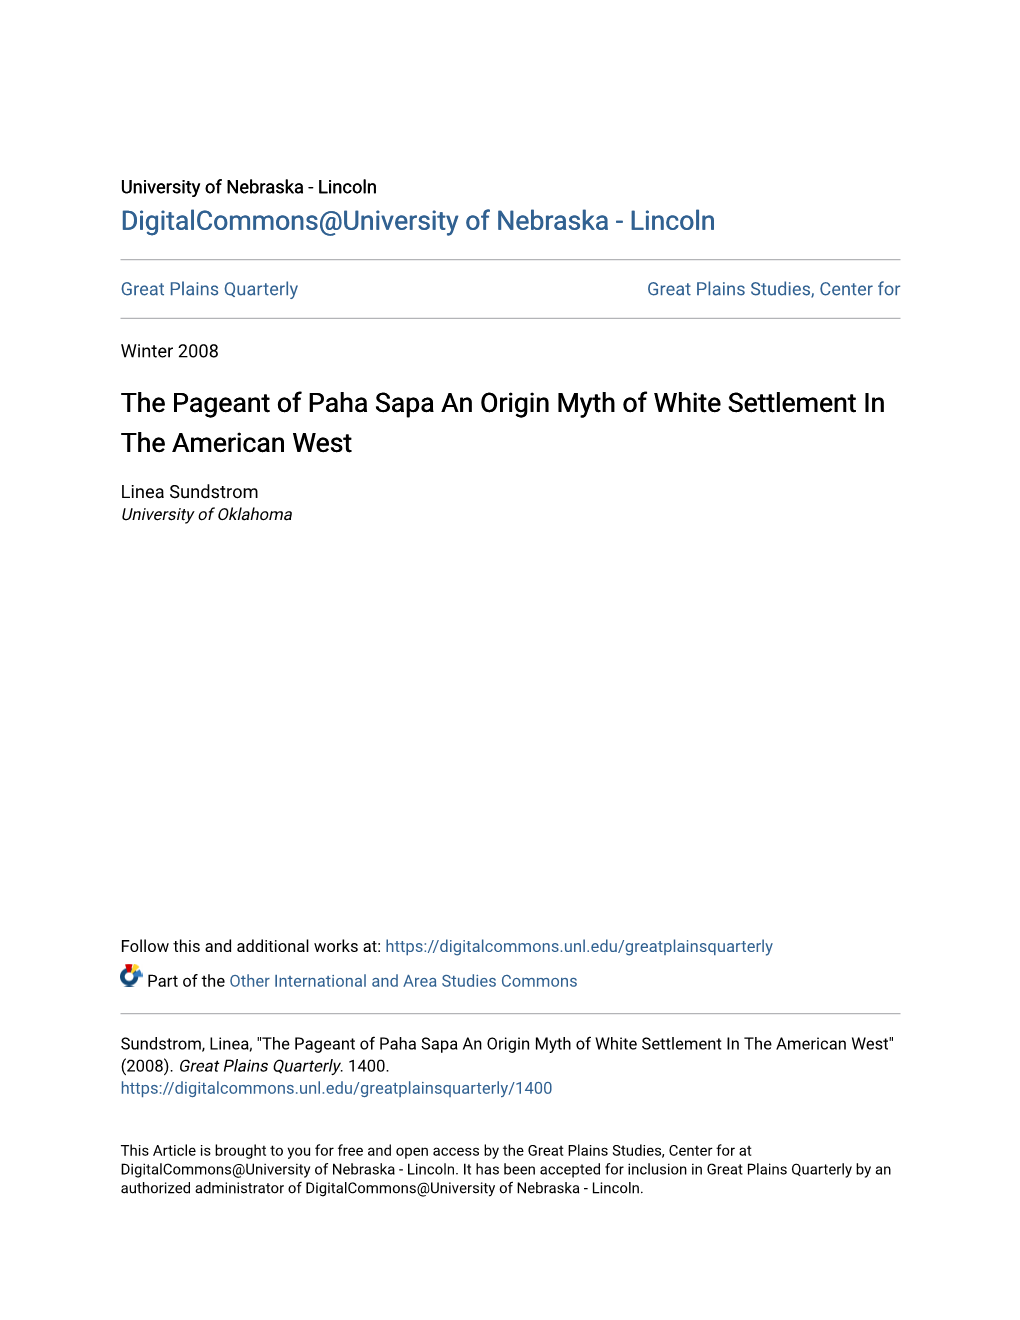 The Pageant of Paha Sapa an Origin Myth of White Settlement in the American West